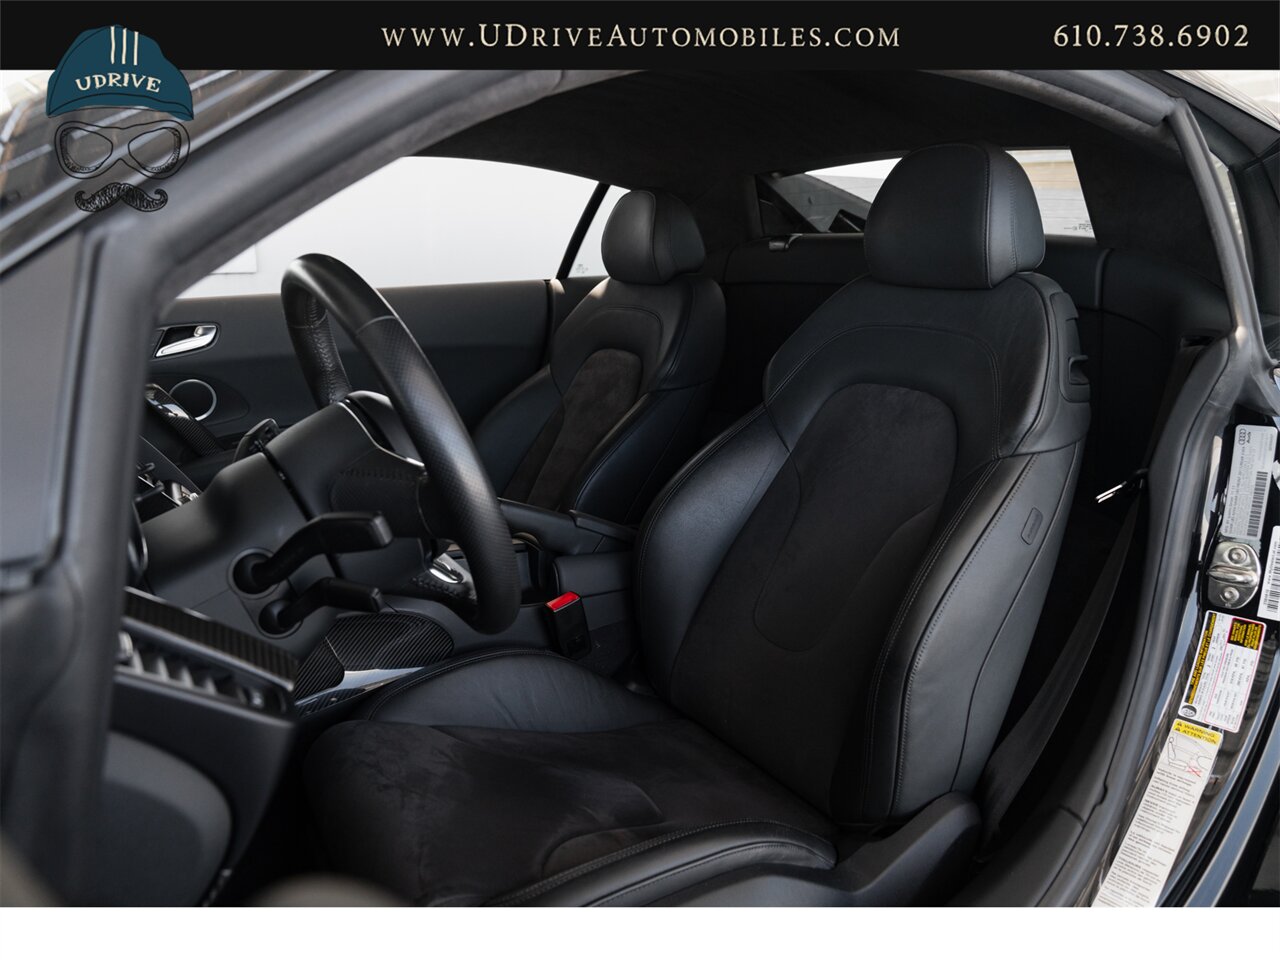 2012 Audi R8 4.2 Quattro  6 Speed Manual 1 Owner Service History - Photo 31 - West Chester, PA 19382